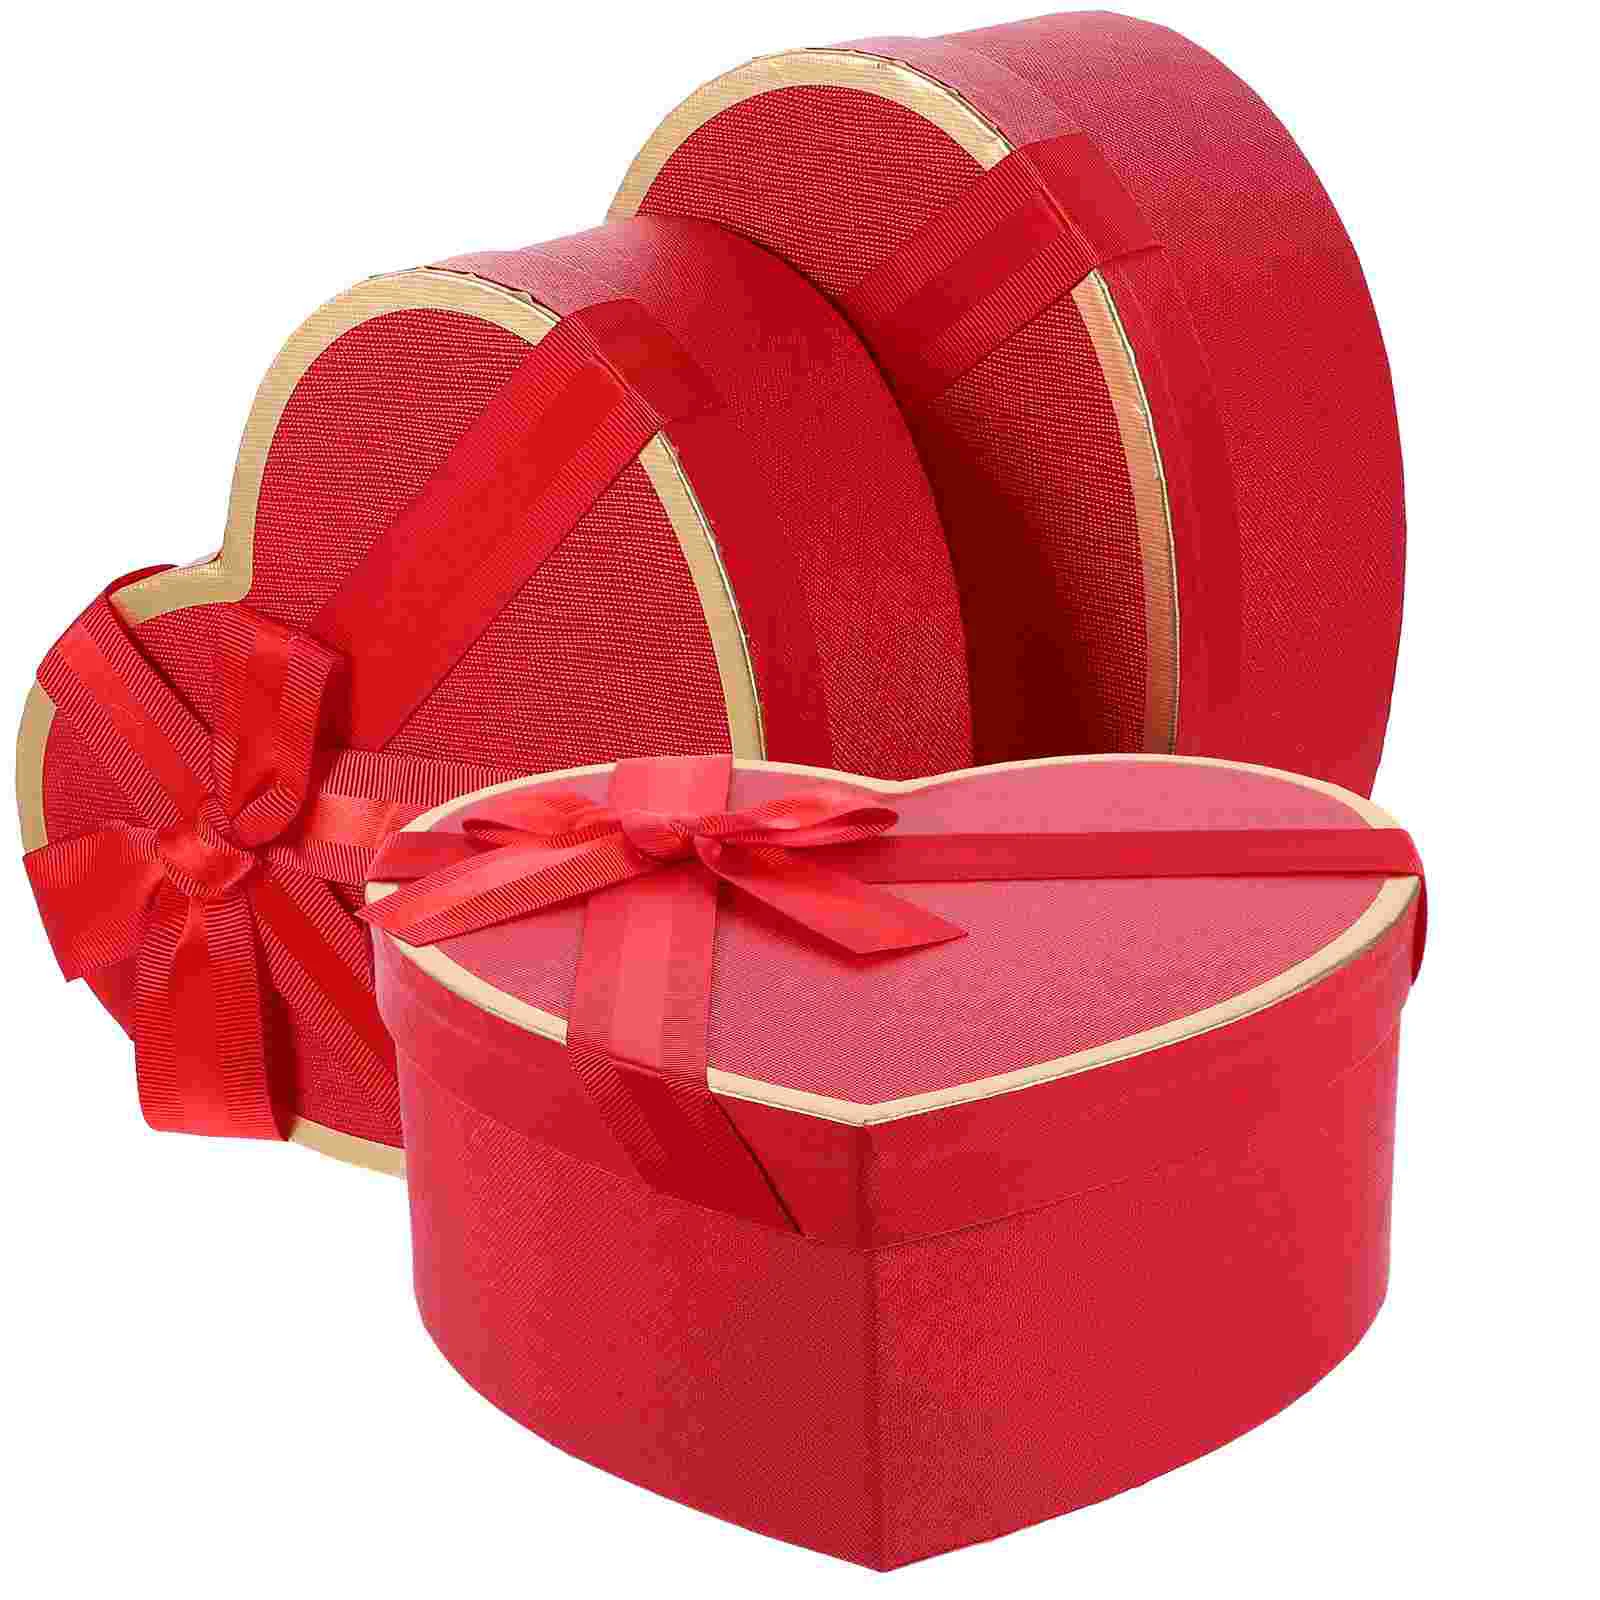 

Heart Shaped Gift Boxes Birthday Gift Valentine's Day Gift Packing Boxes Anniversary Surprise Gifts Wedding Decorations